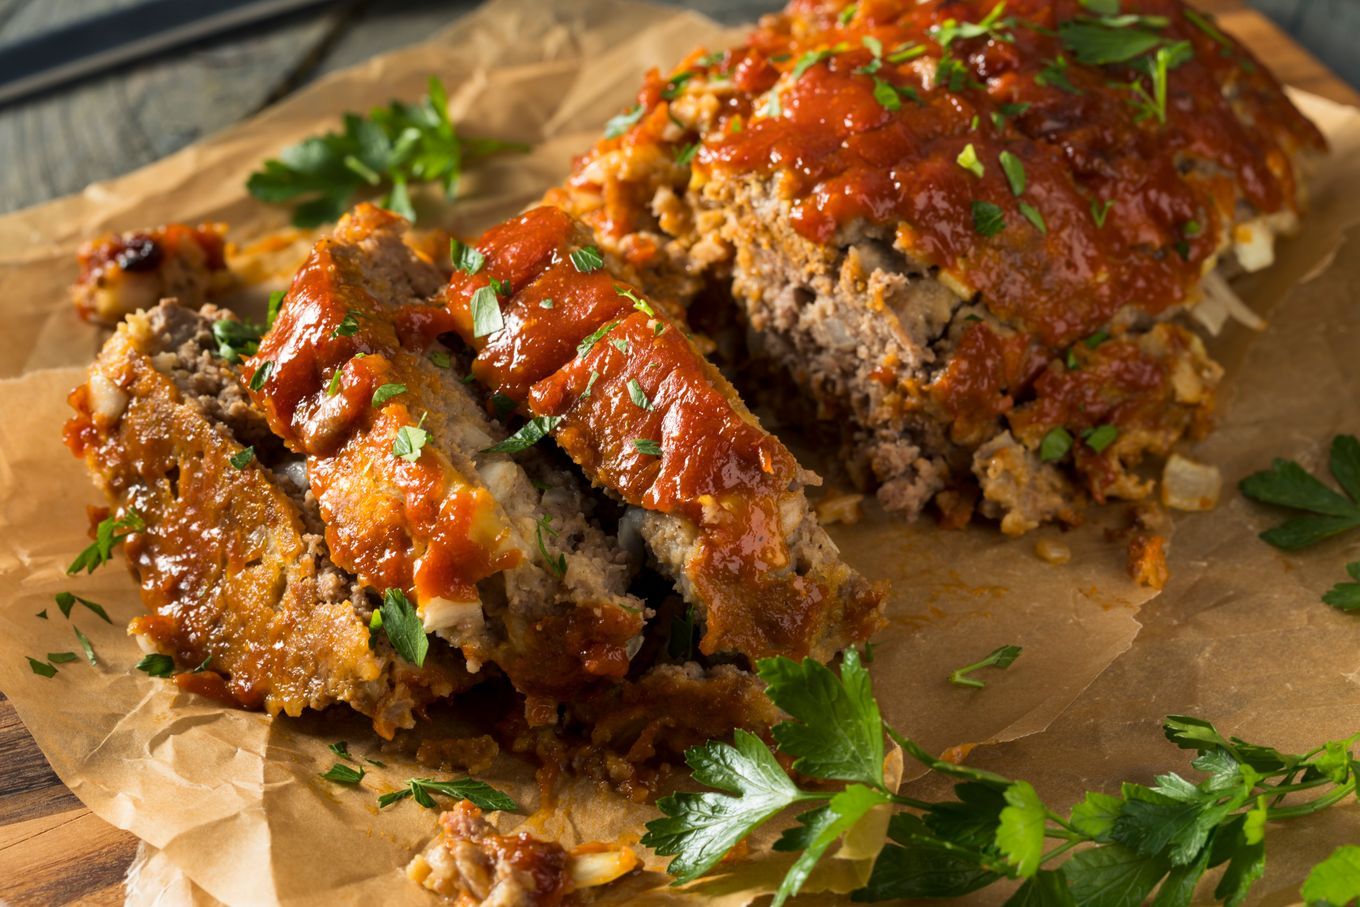 Good and hearty: meatloaf is a traditional German dish